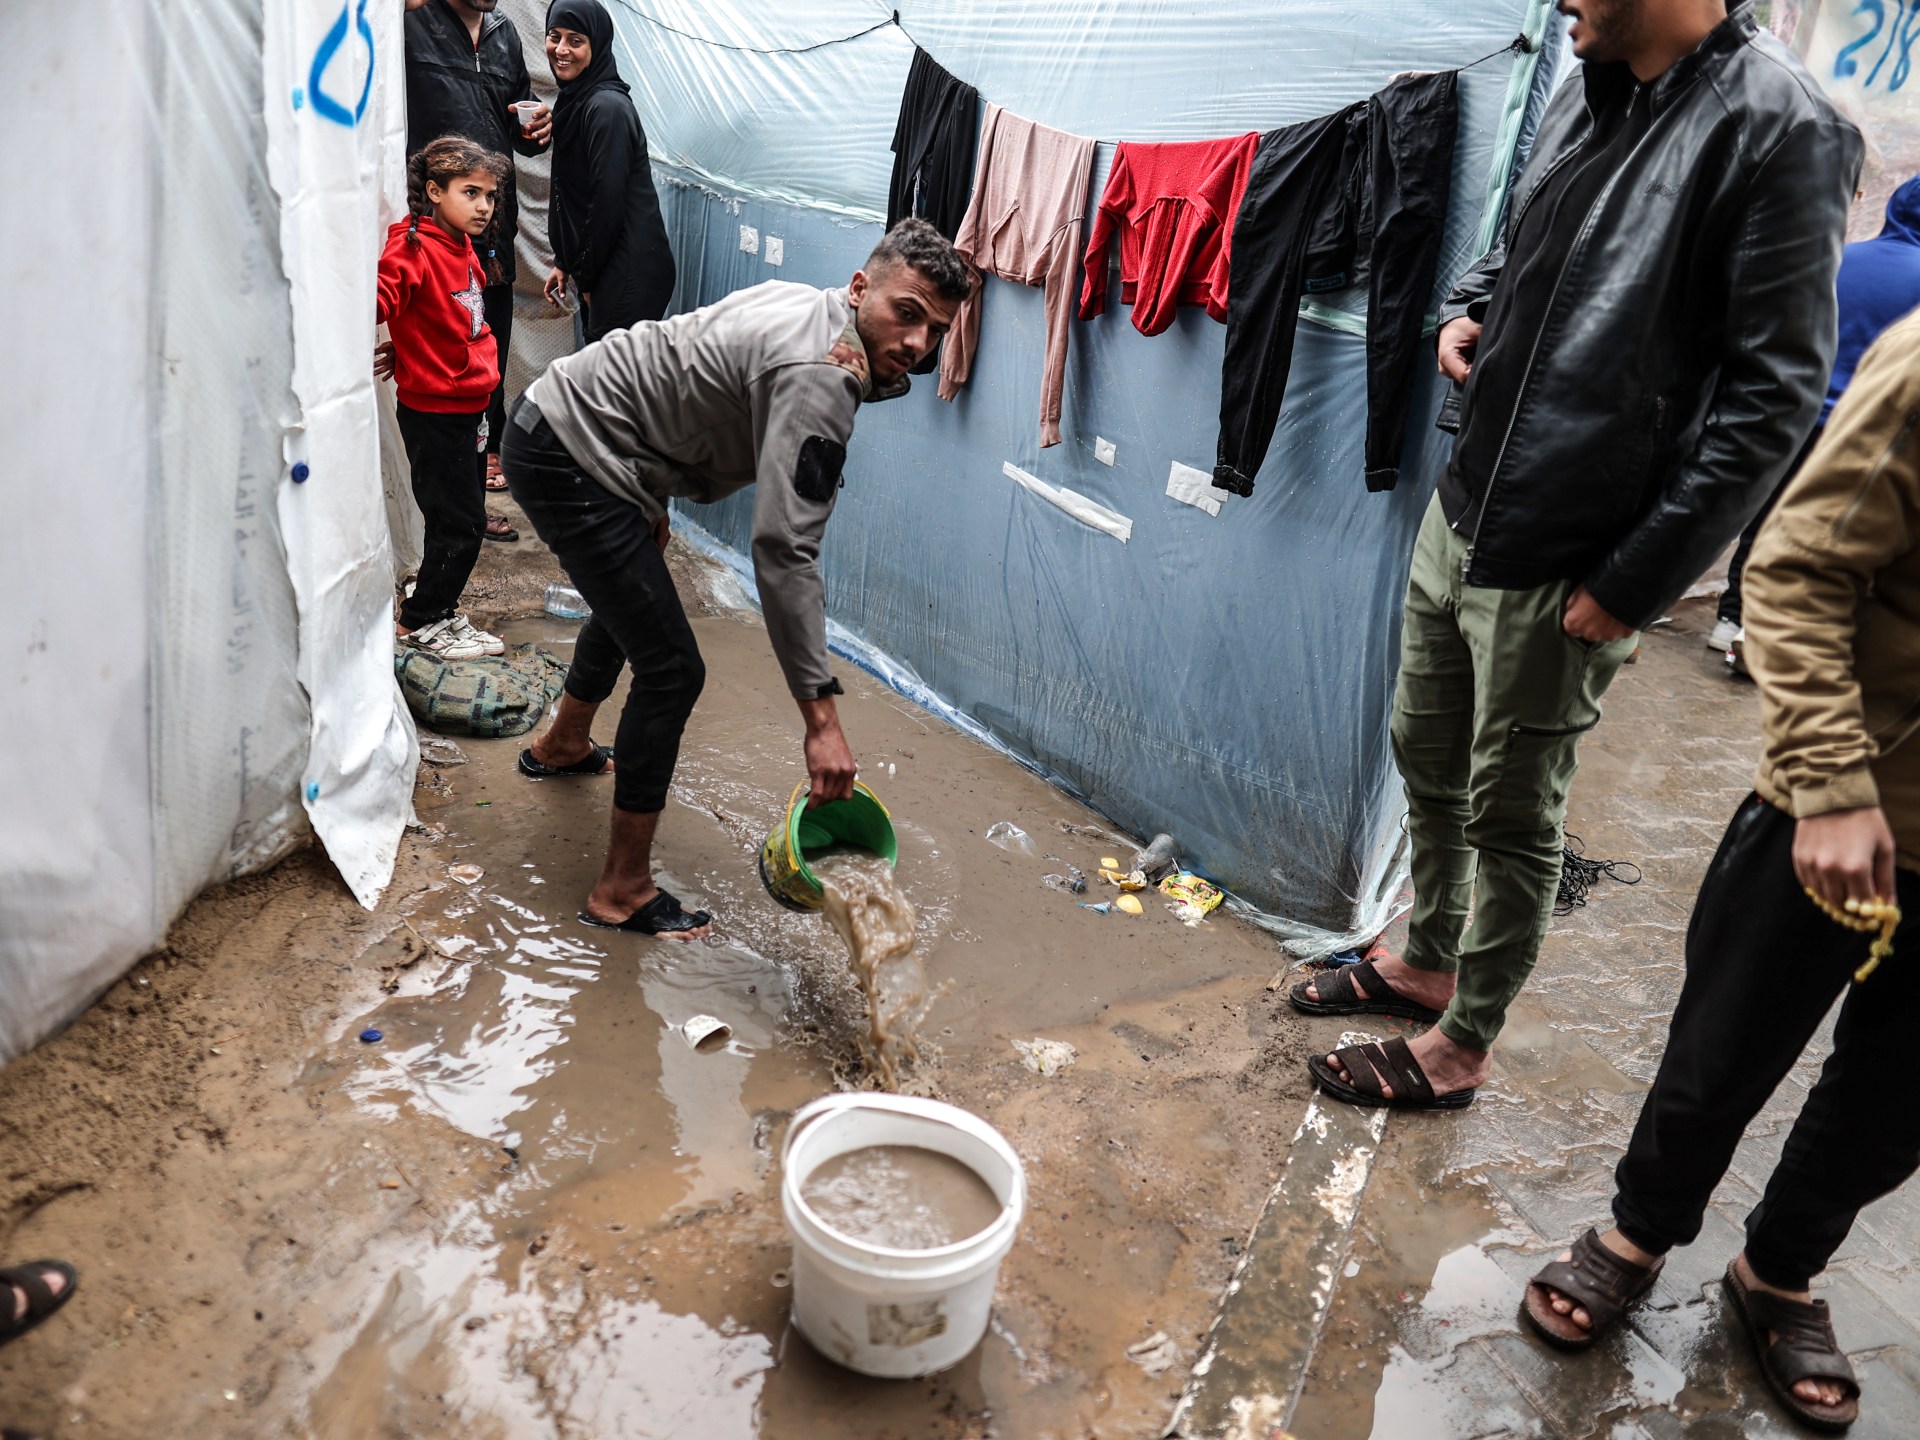 Harsh weather adds to hardships for Palestinians displaced by war | Israel-Palestine conflict News #Harsh #weather #adds #hardships #Palestinians #displaced #war #IsraelPalestine #conflict #News